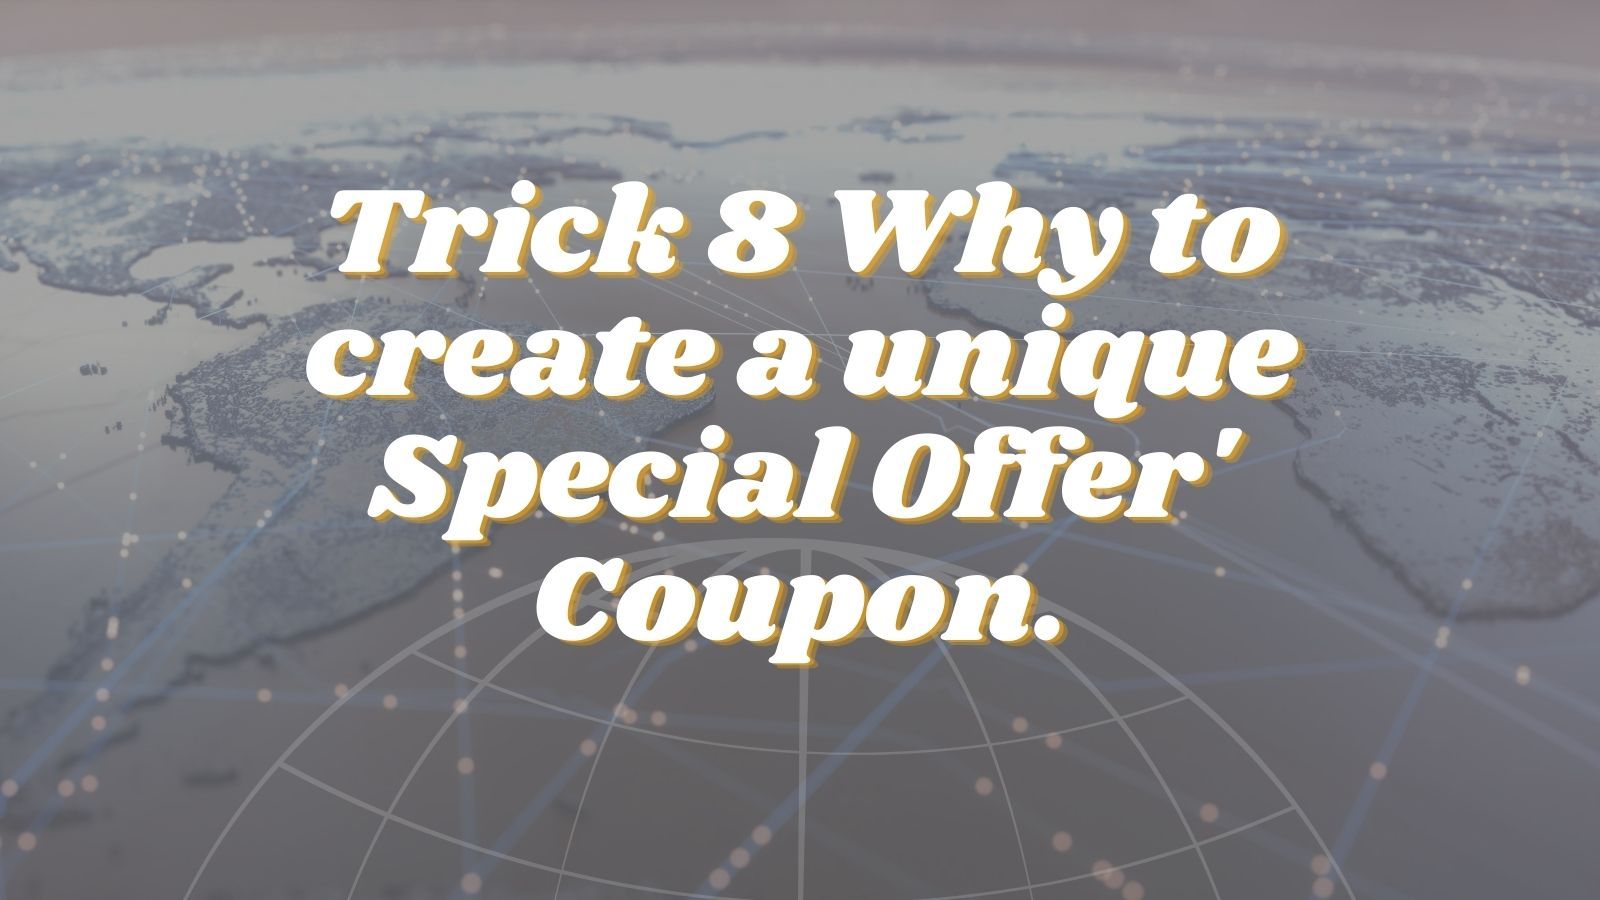 Why to create a unique Special Offer Coupon